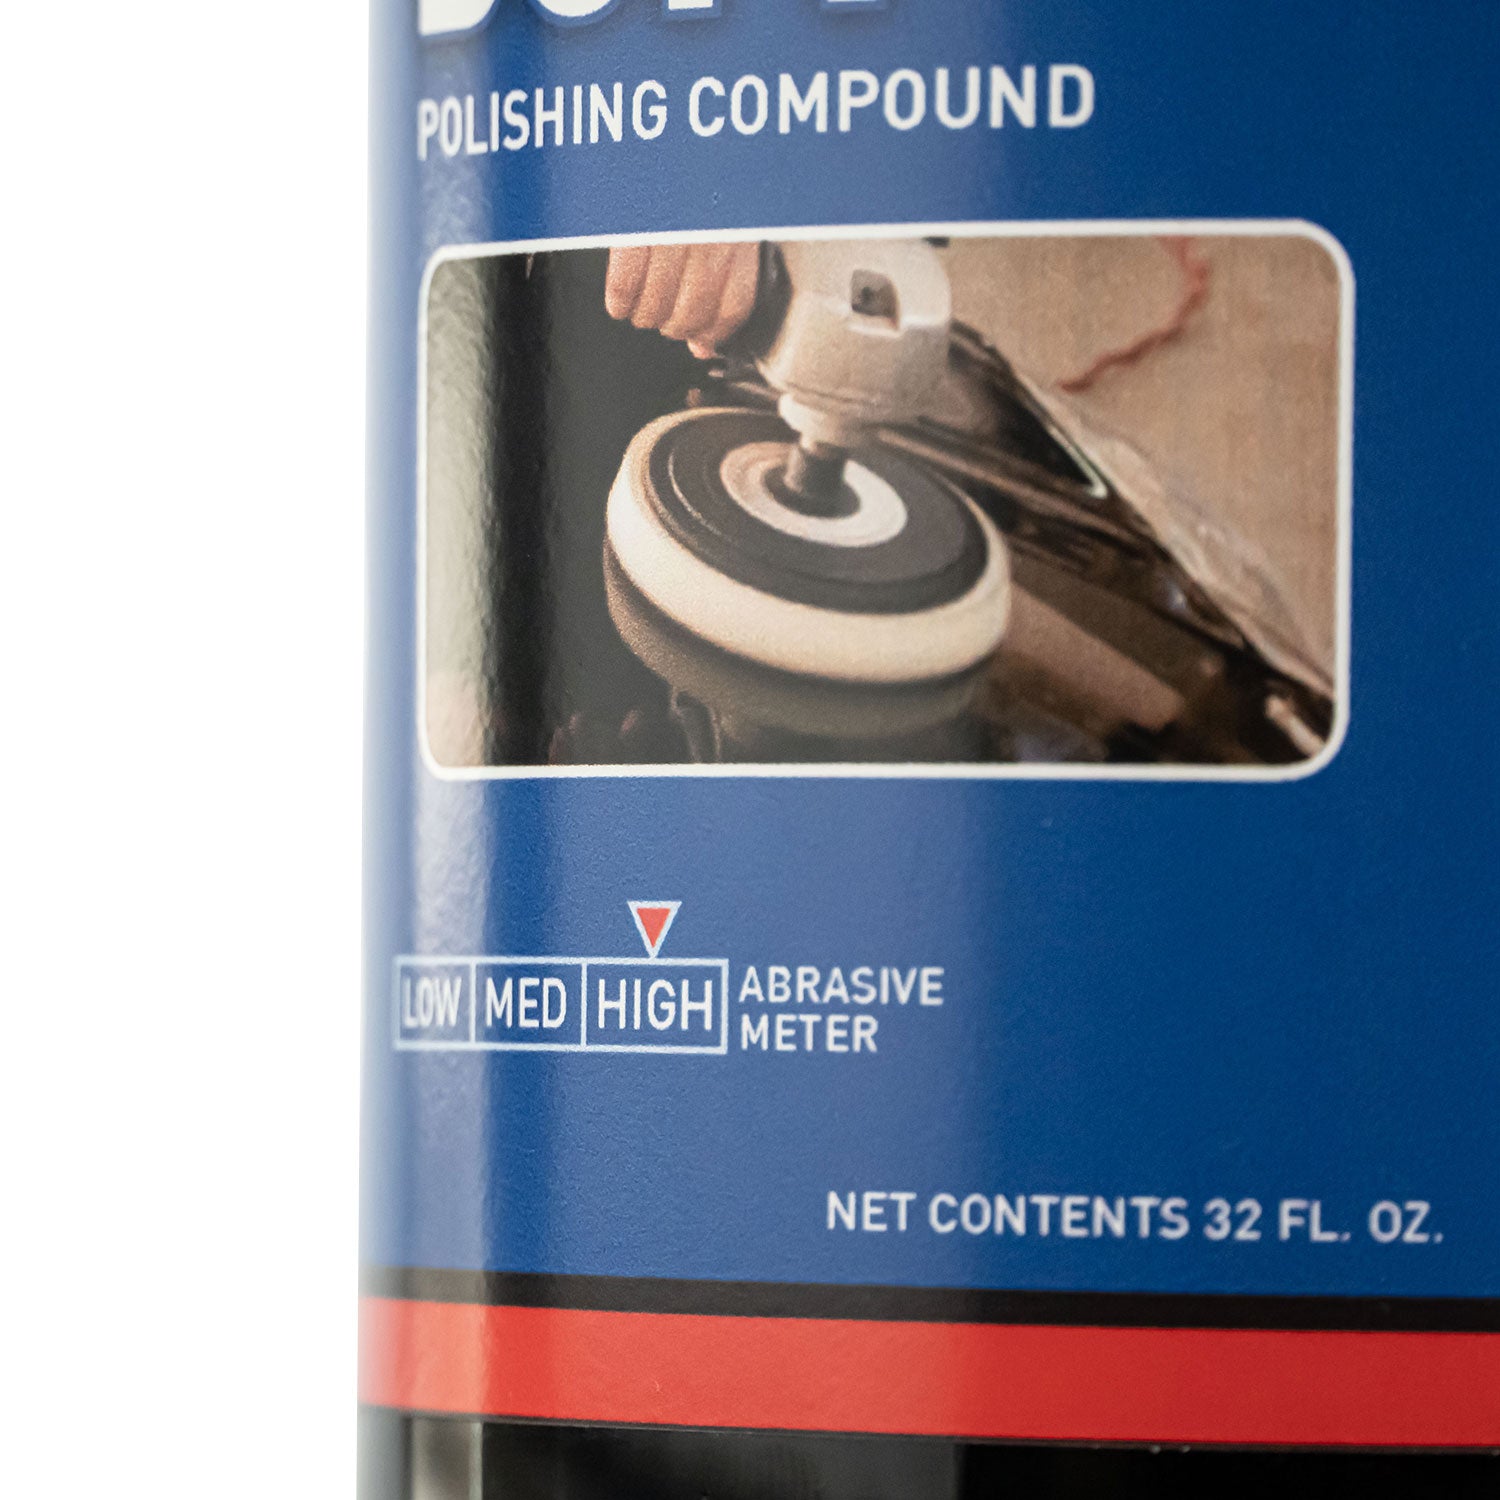 heavy-duty-buffing-compound